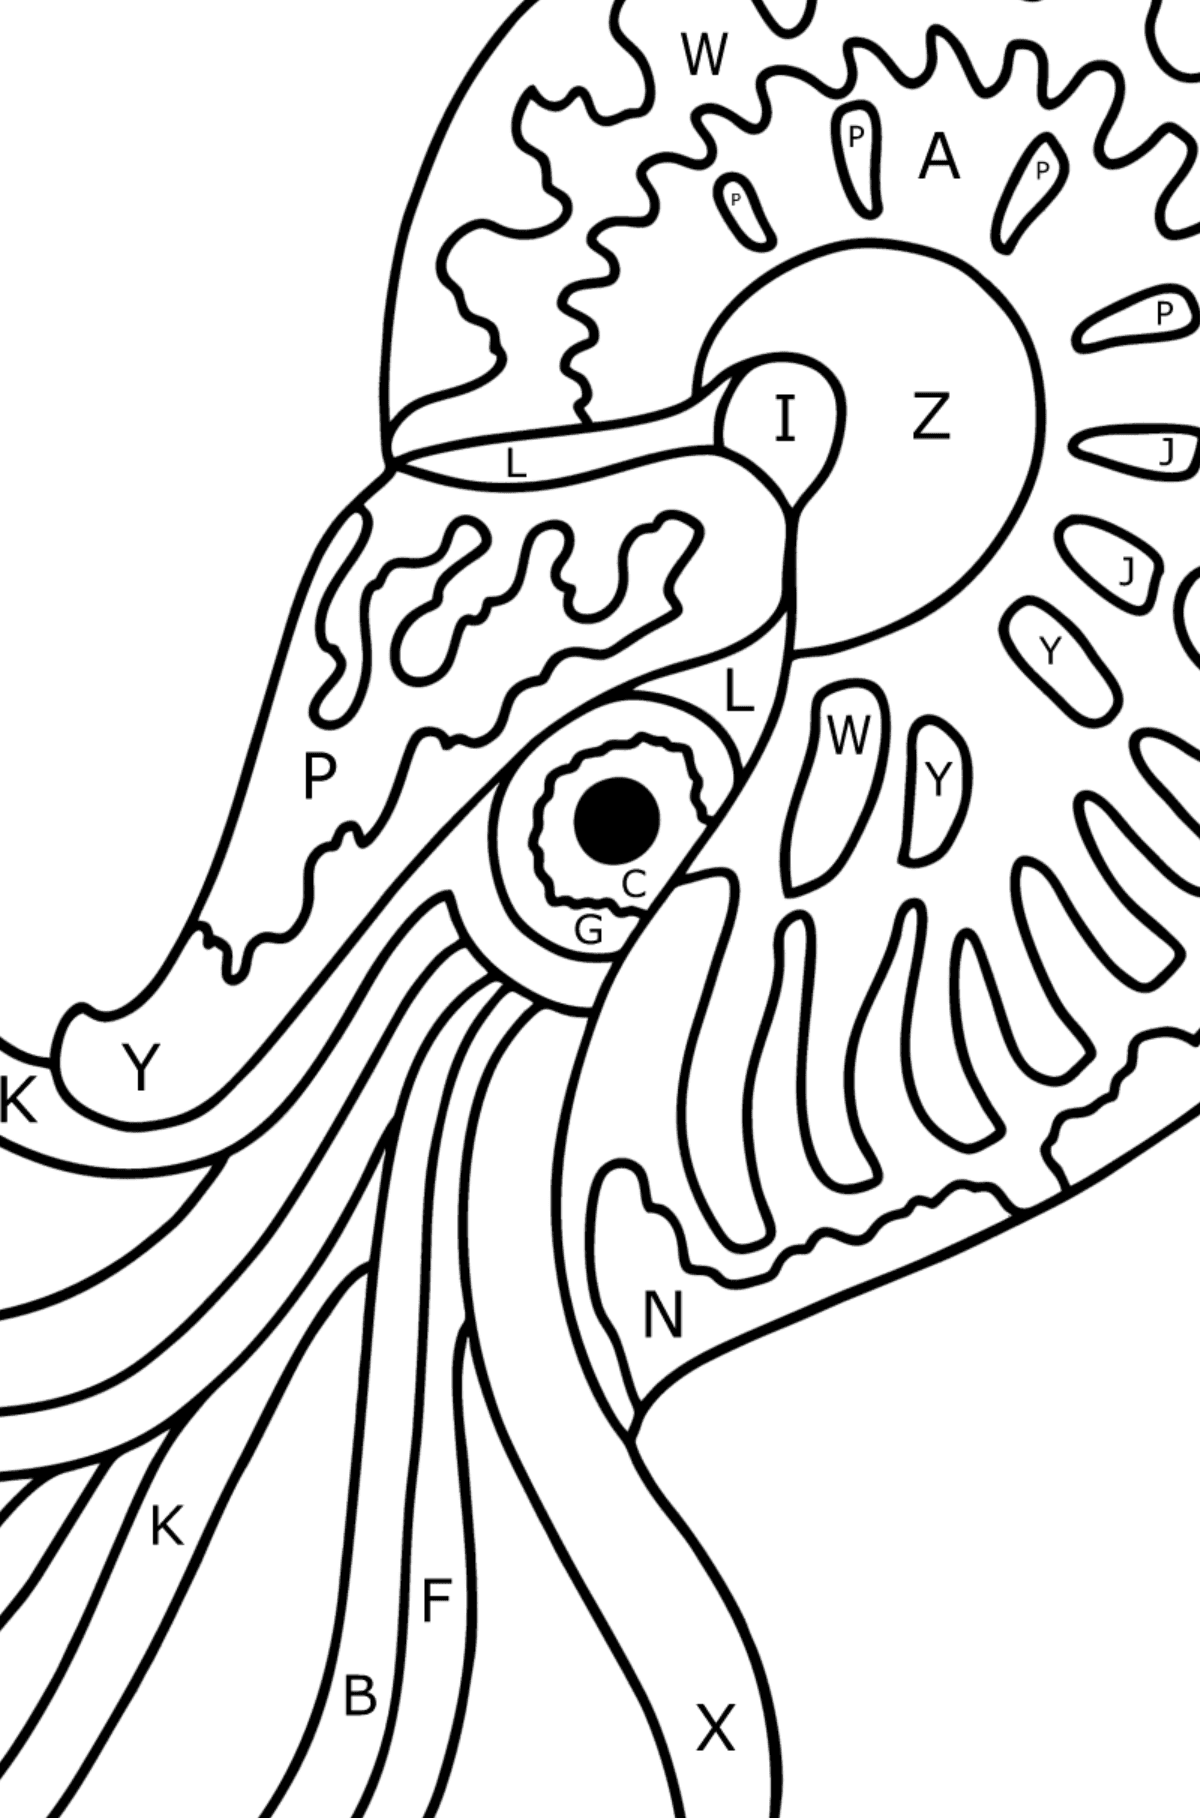 Nautilus coloring page - Coloring by Letters for Kids